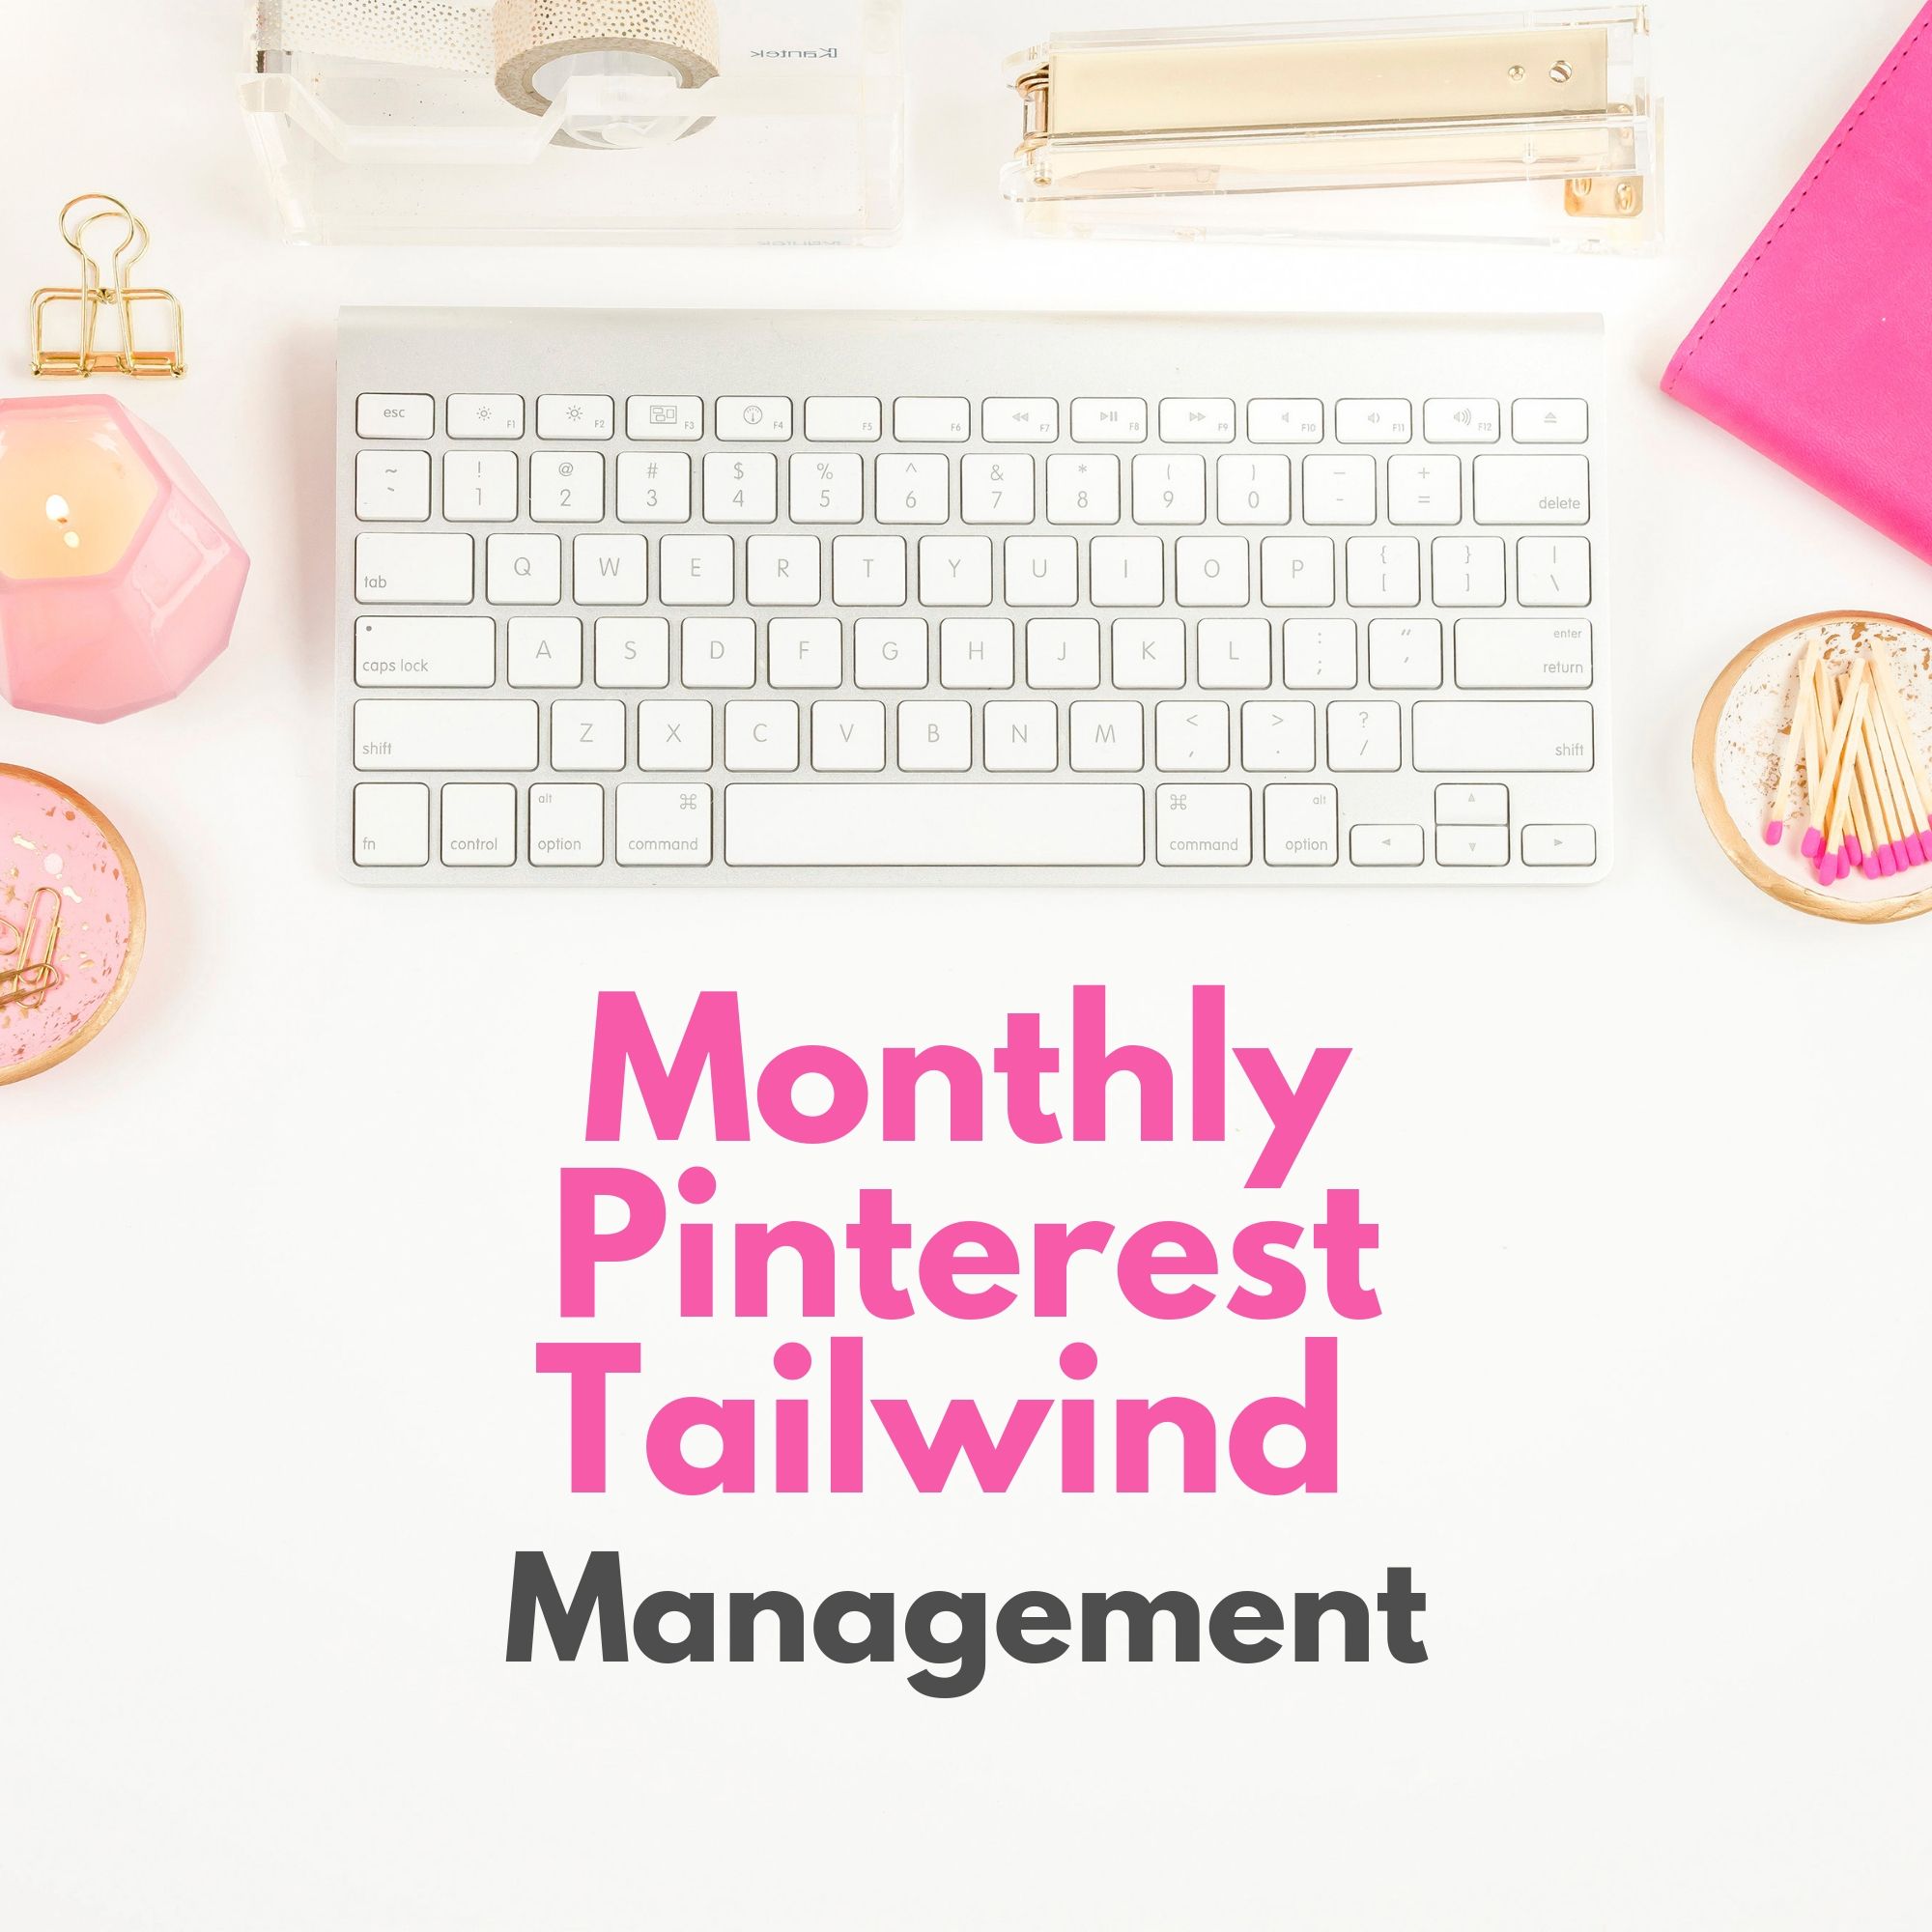 Monthly Pinterest Tailwind Management